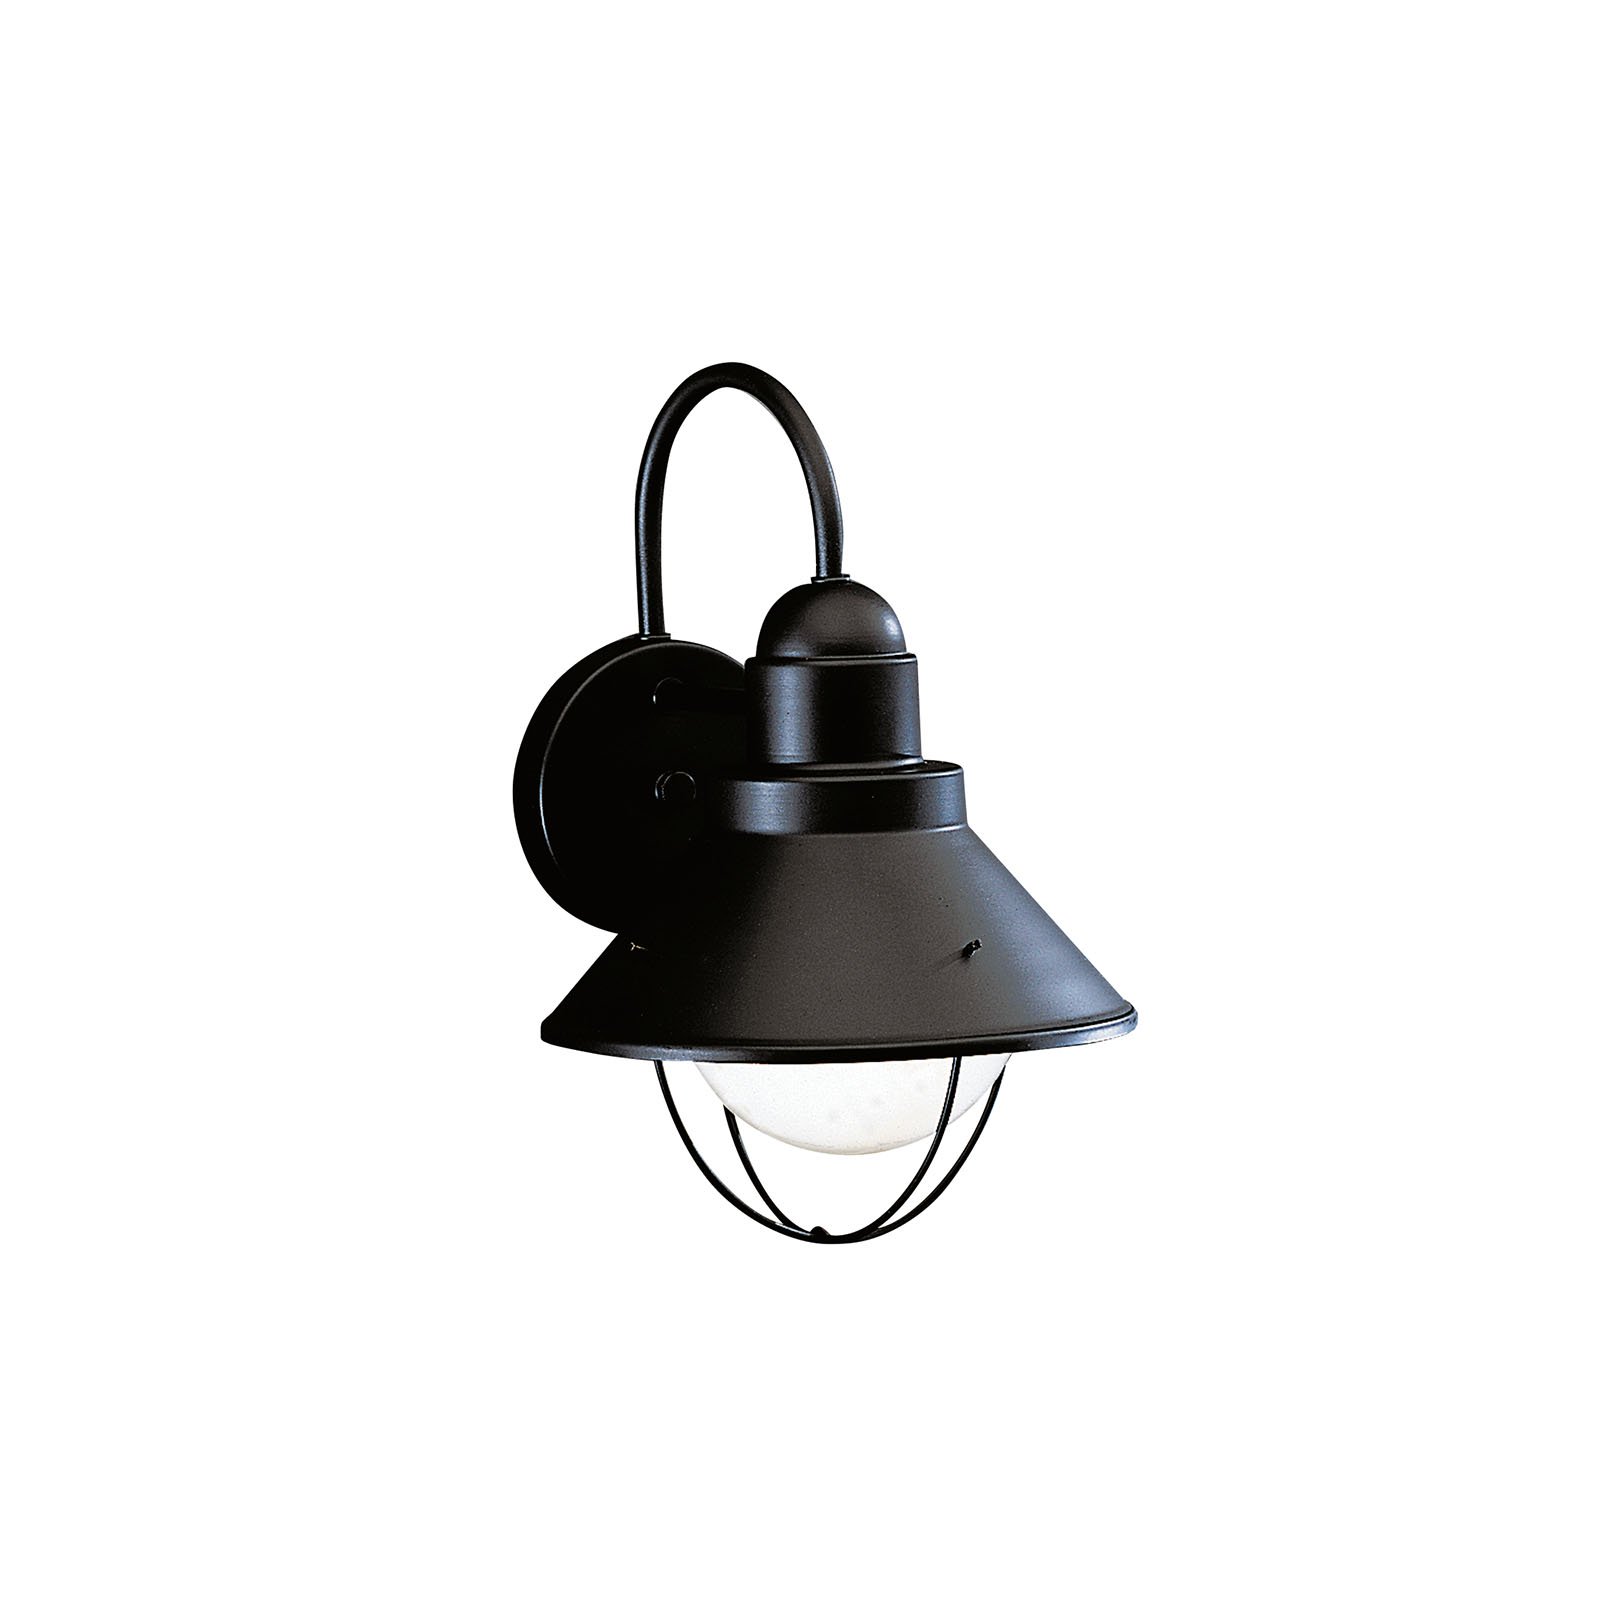 The Seaside(TM) 12in. 1 light outdoor wall light features a classic look with its Black and glass globe. The Seaside(TM)wall light works in several aesthetic environments, including rustic, coastal, traditional and transitional.